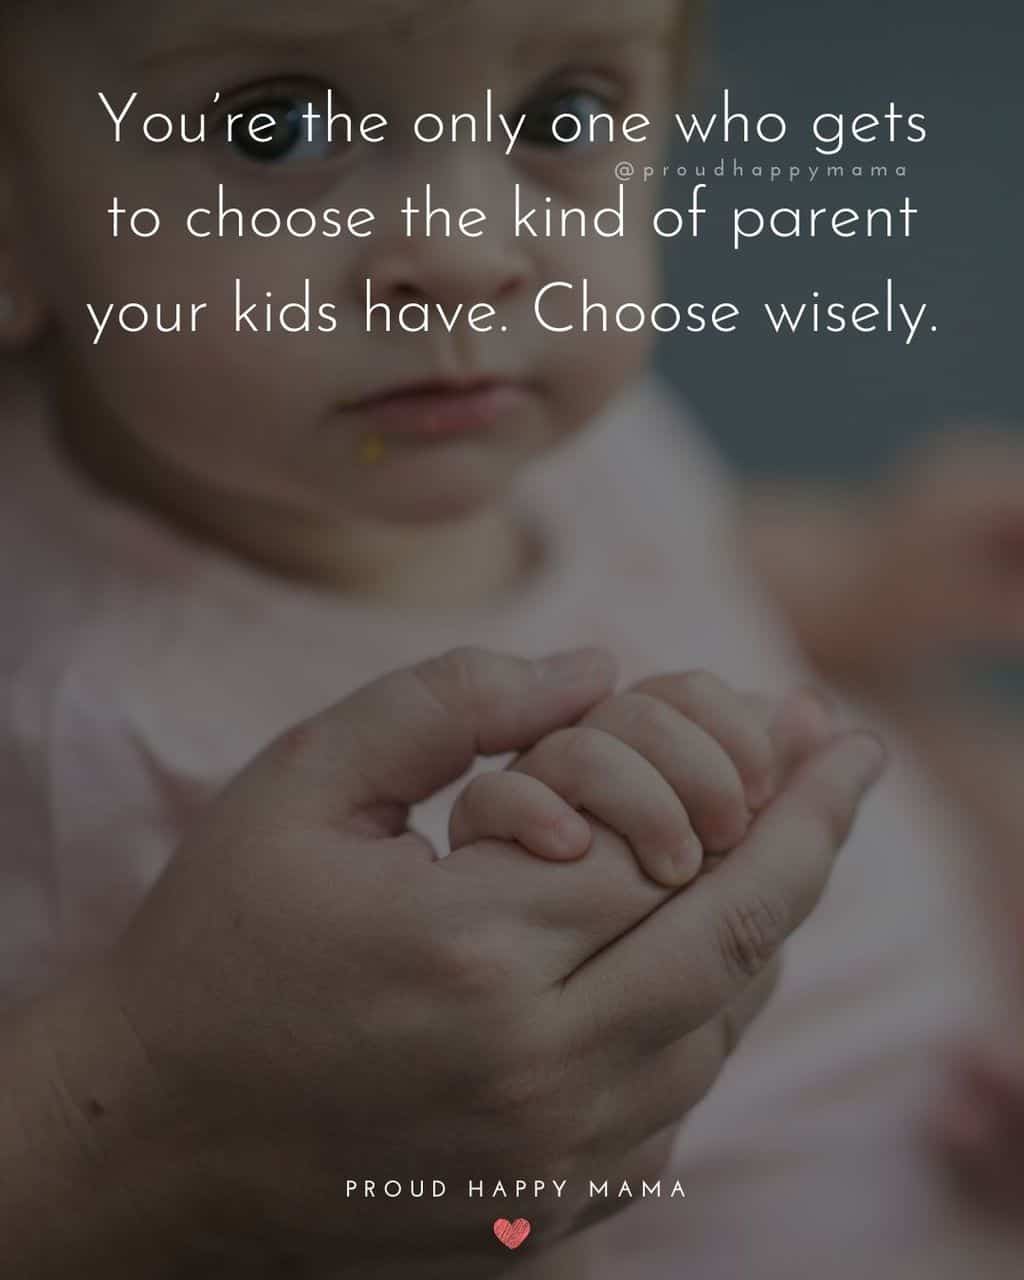 Parenting Quotes - You’re the only one who gets to choose the kind of parent your kids have. Choose wisely.’